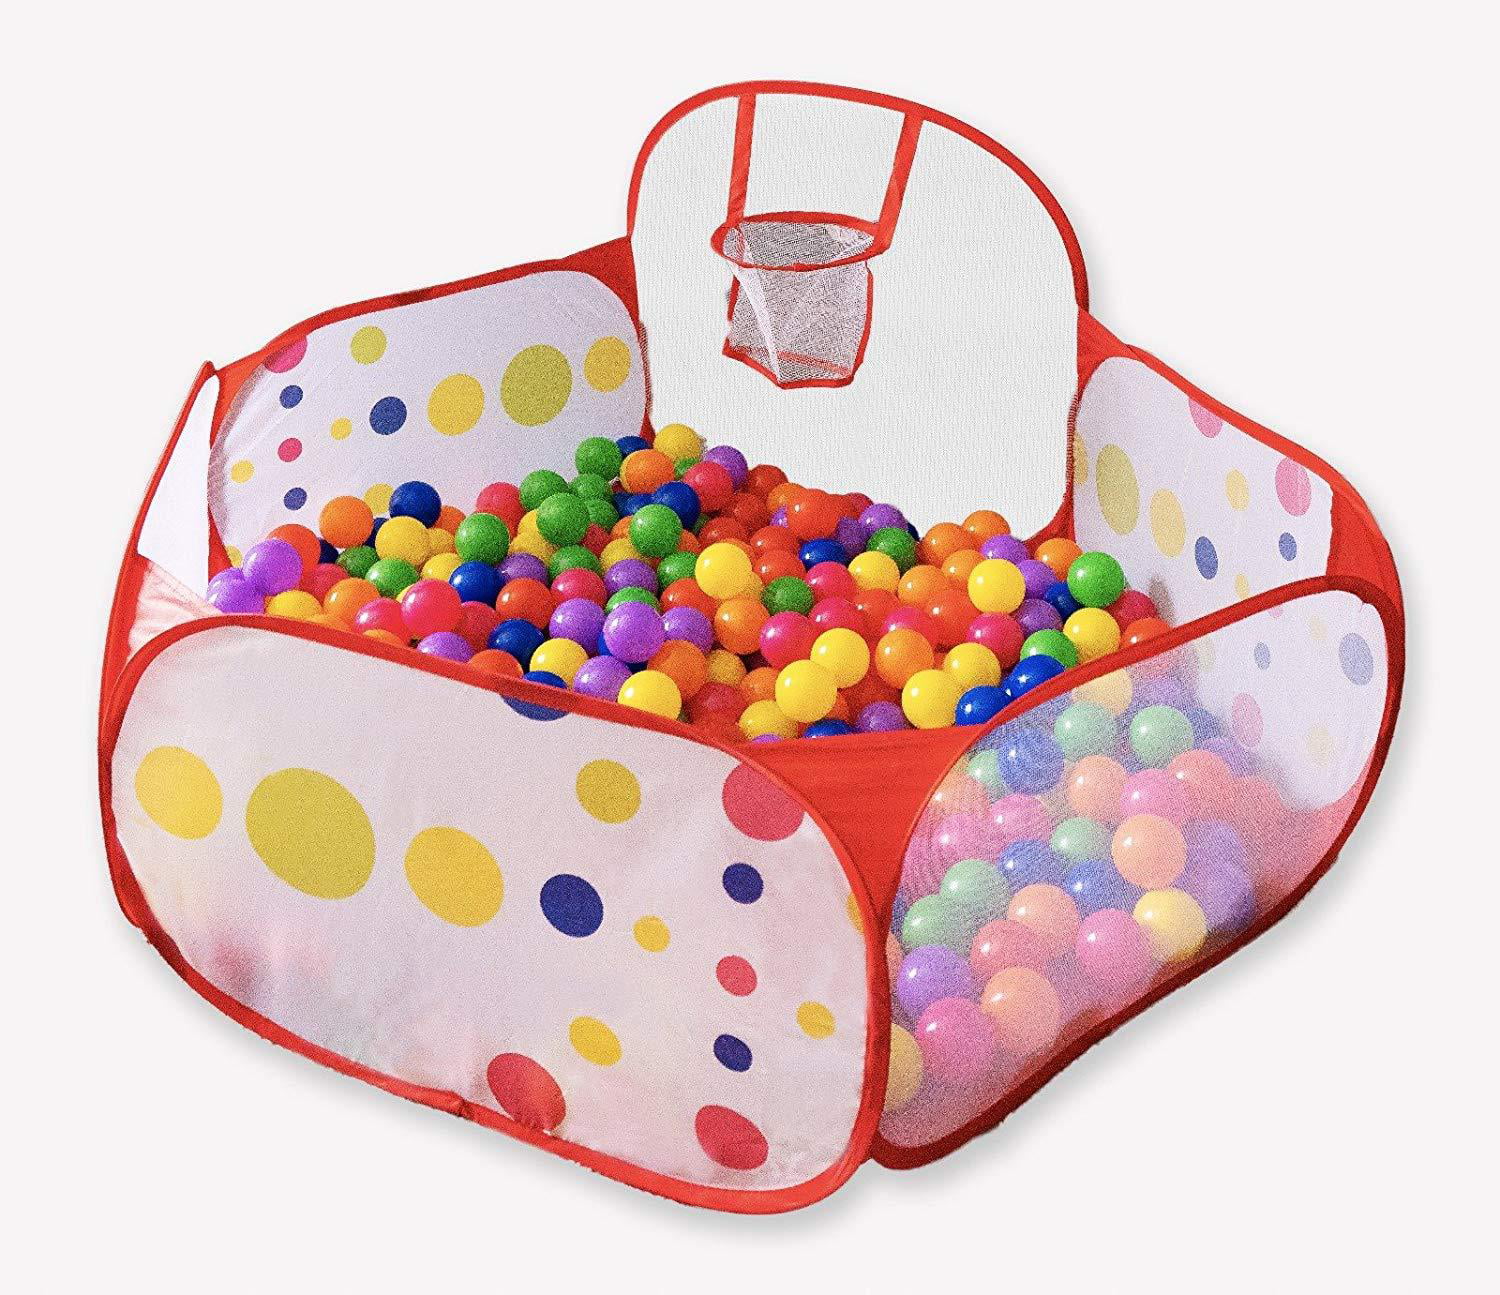 Ship from USA TRENDBOX 1.2M Indoor Collapsible Ocean Ball Pit Pool Tent House Foldable for Baby Children Kids Birthday Parties Playground